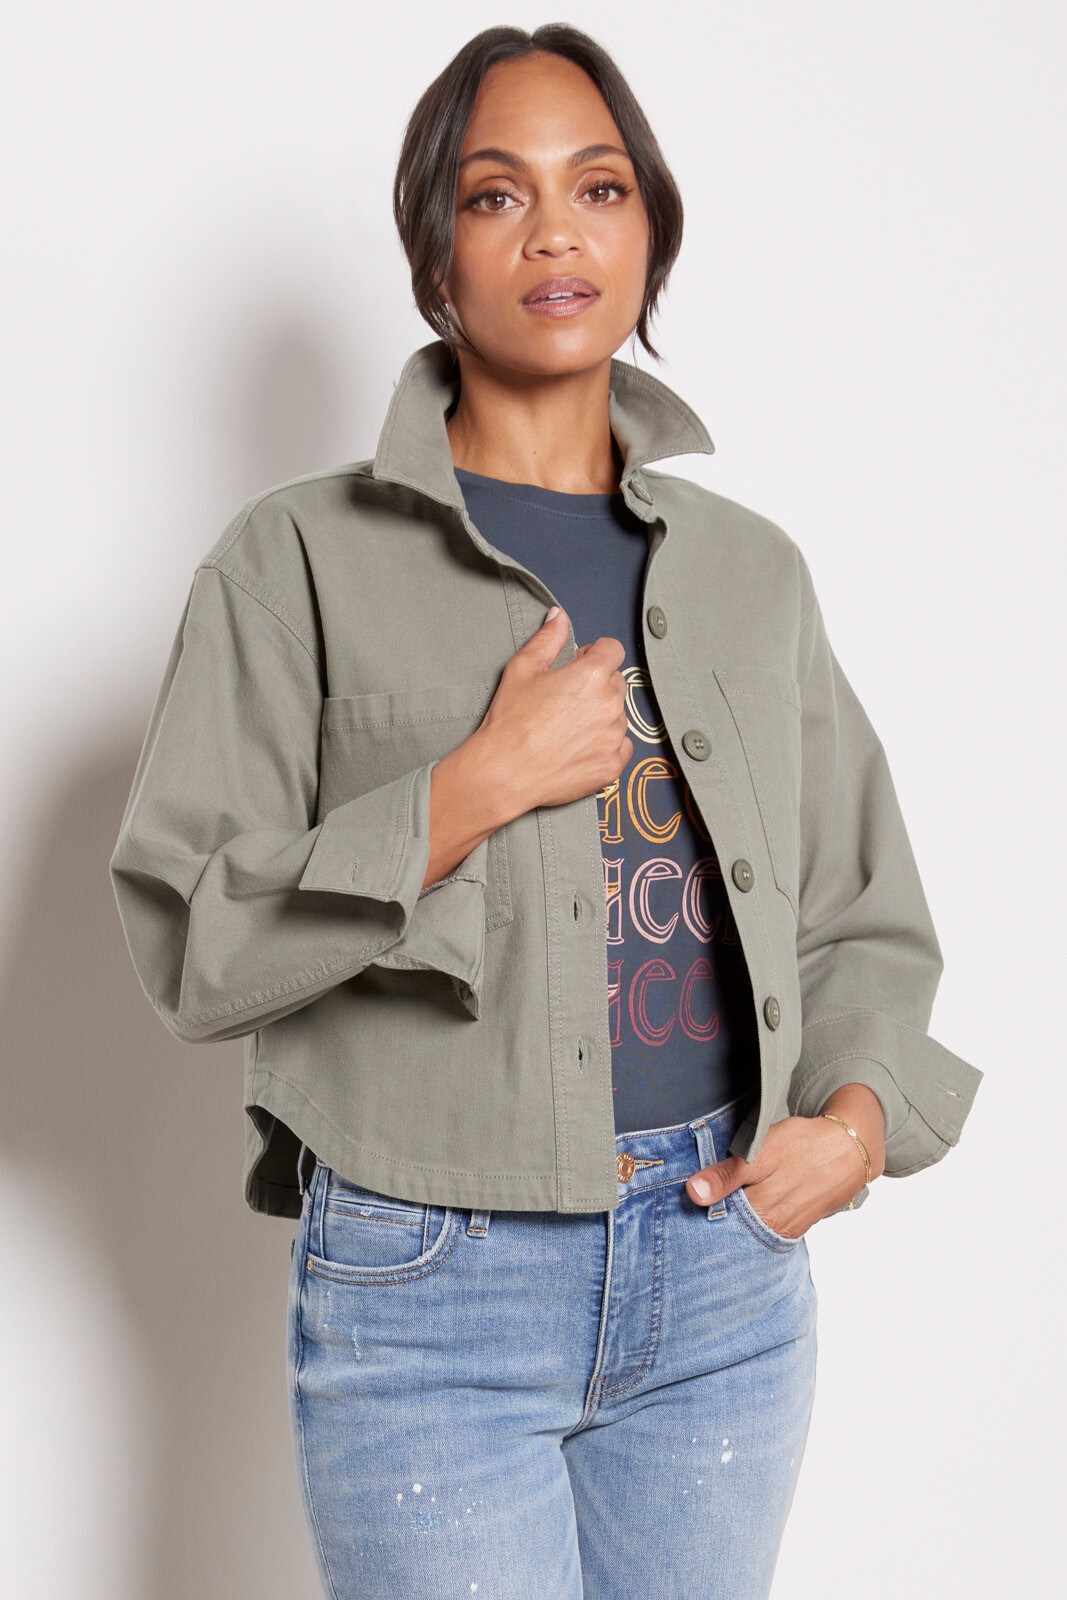 Women's All About The Patch Crop Denim Jacket